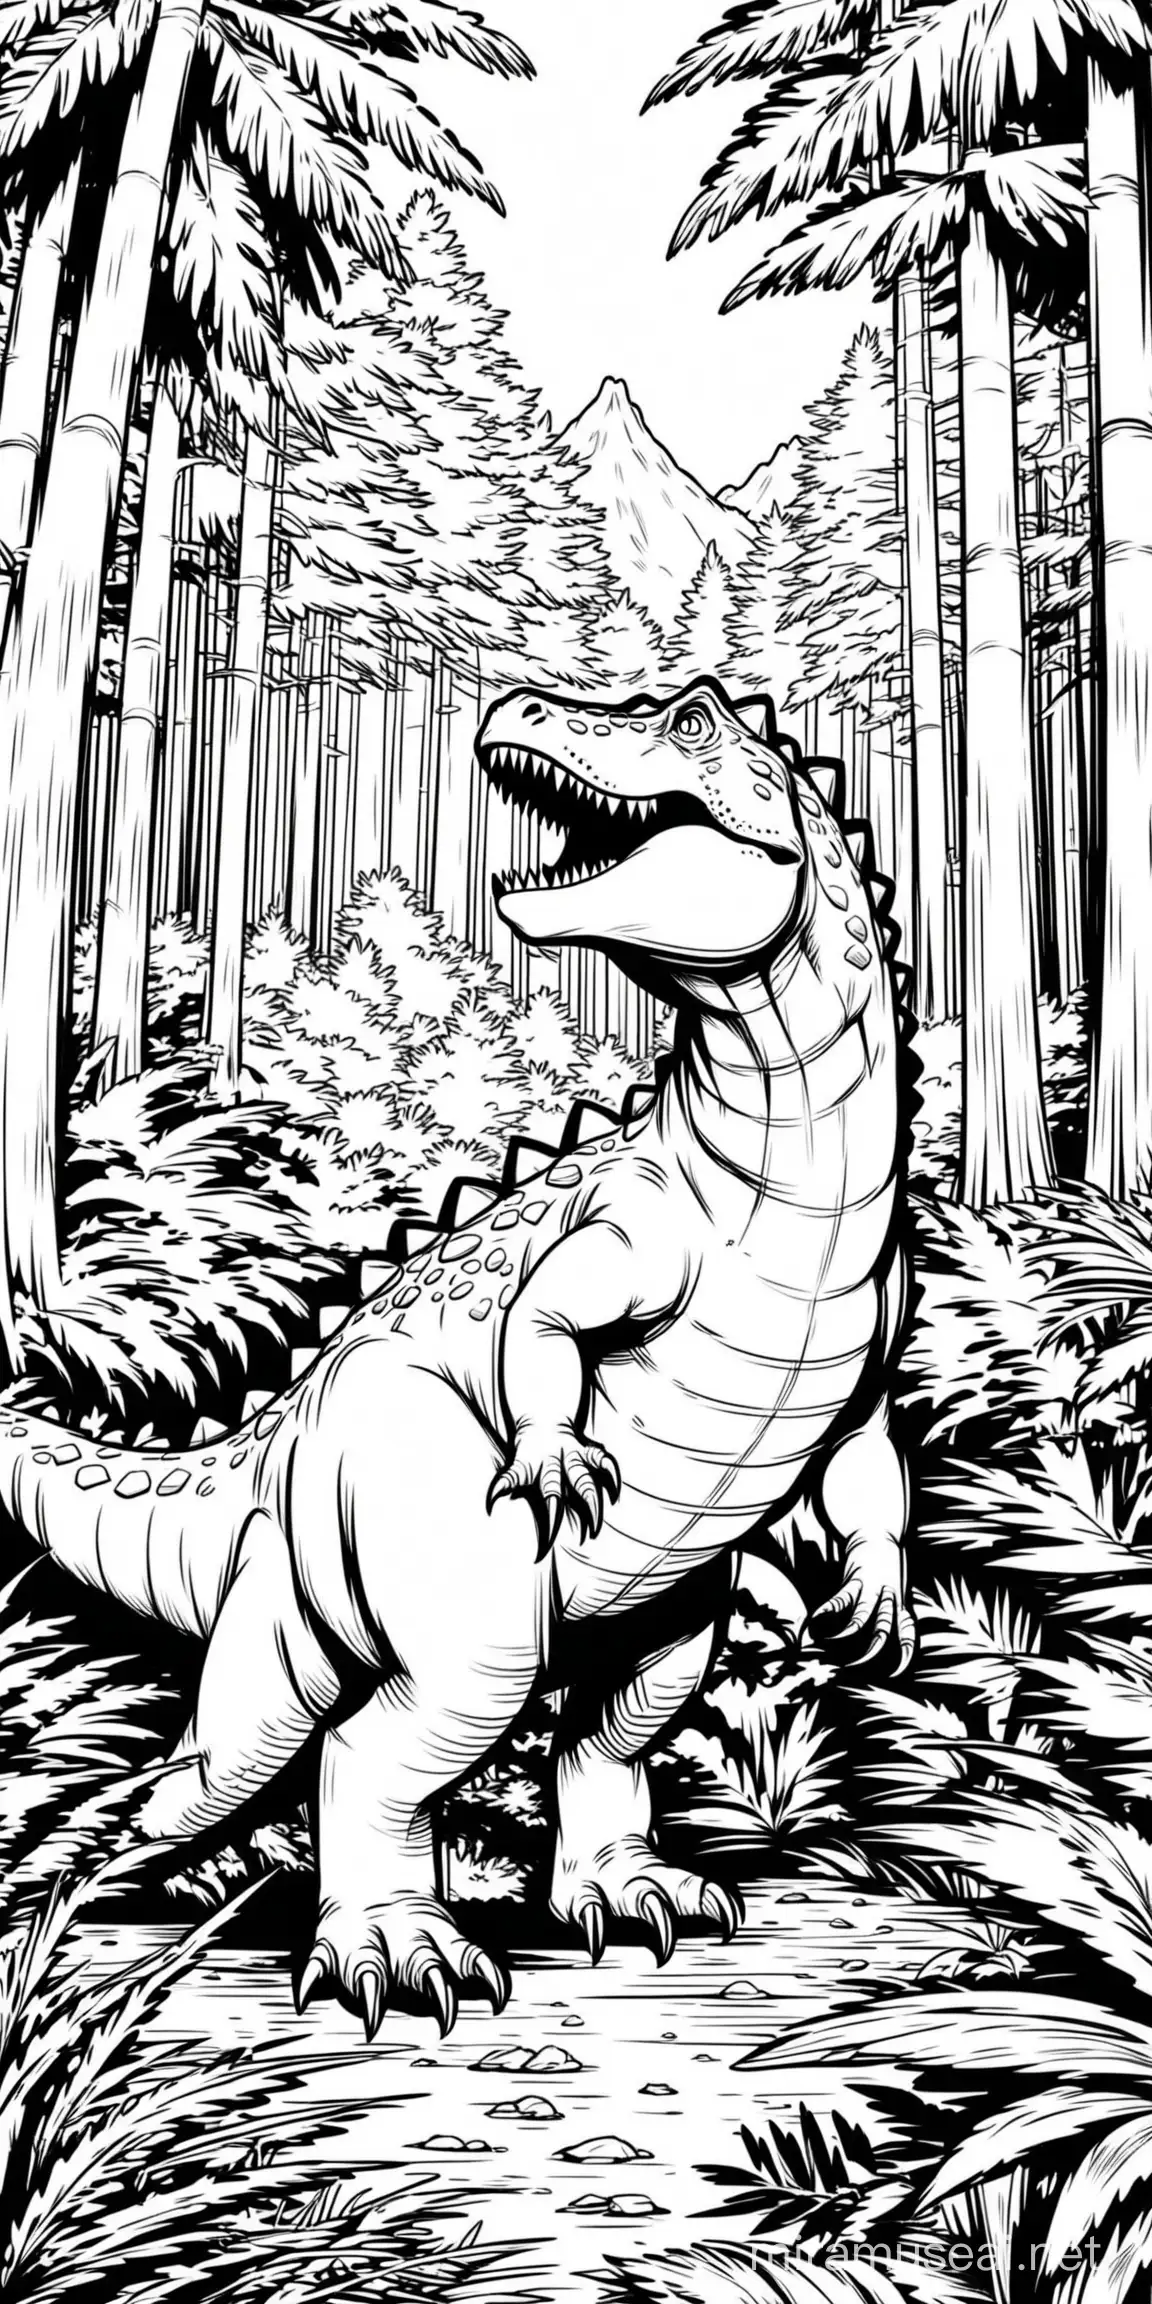 dinosaur in a forest cartoon style no color with low detail